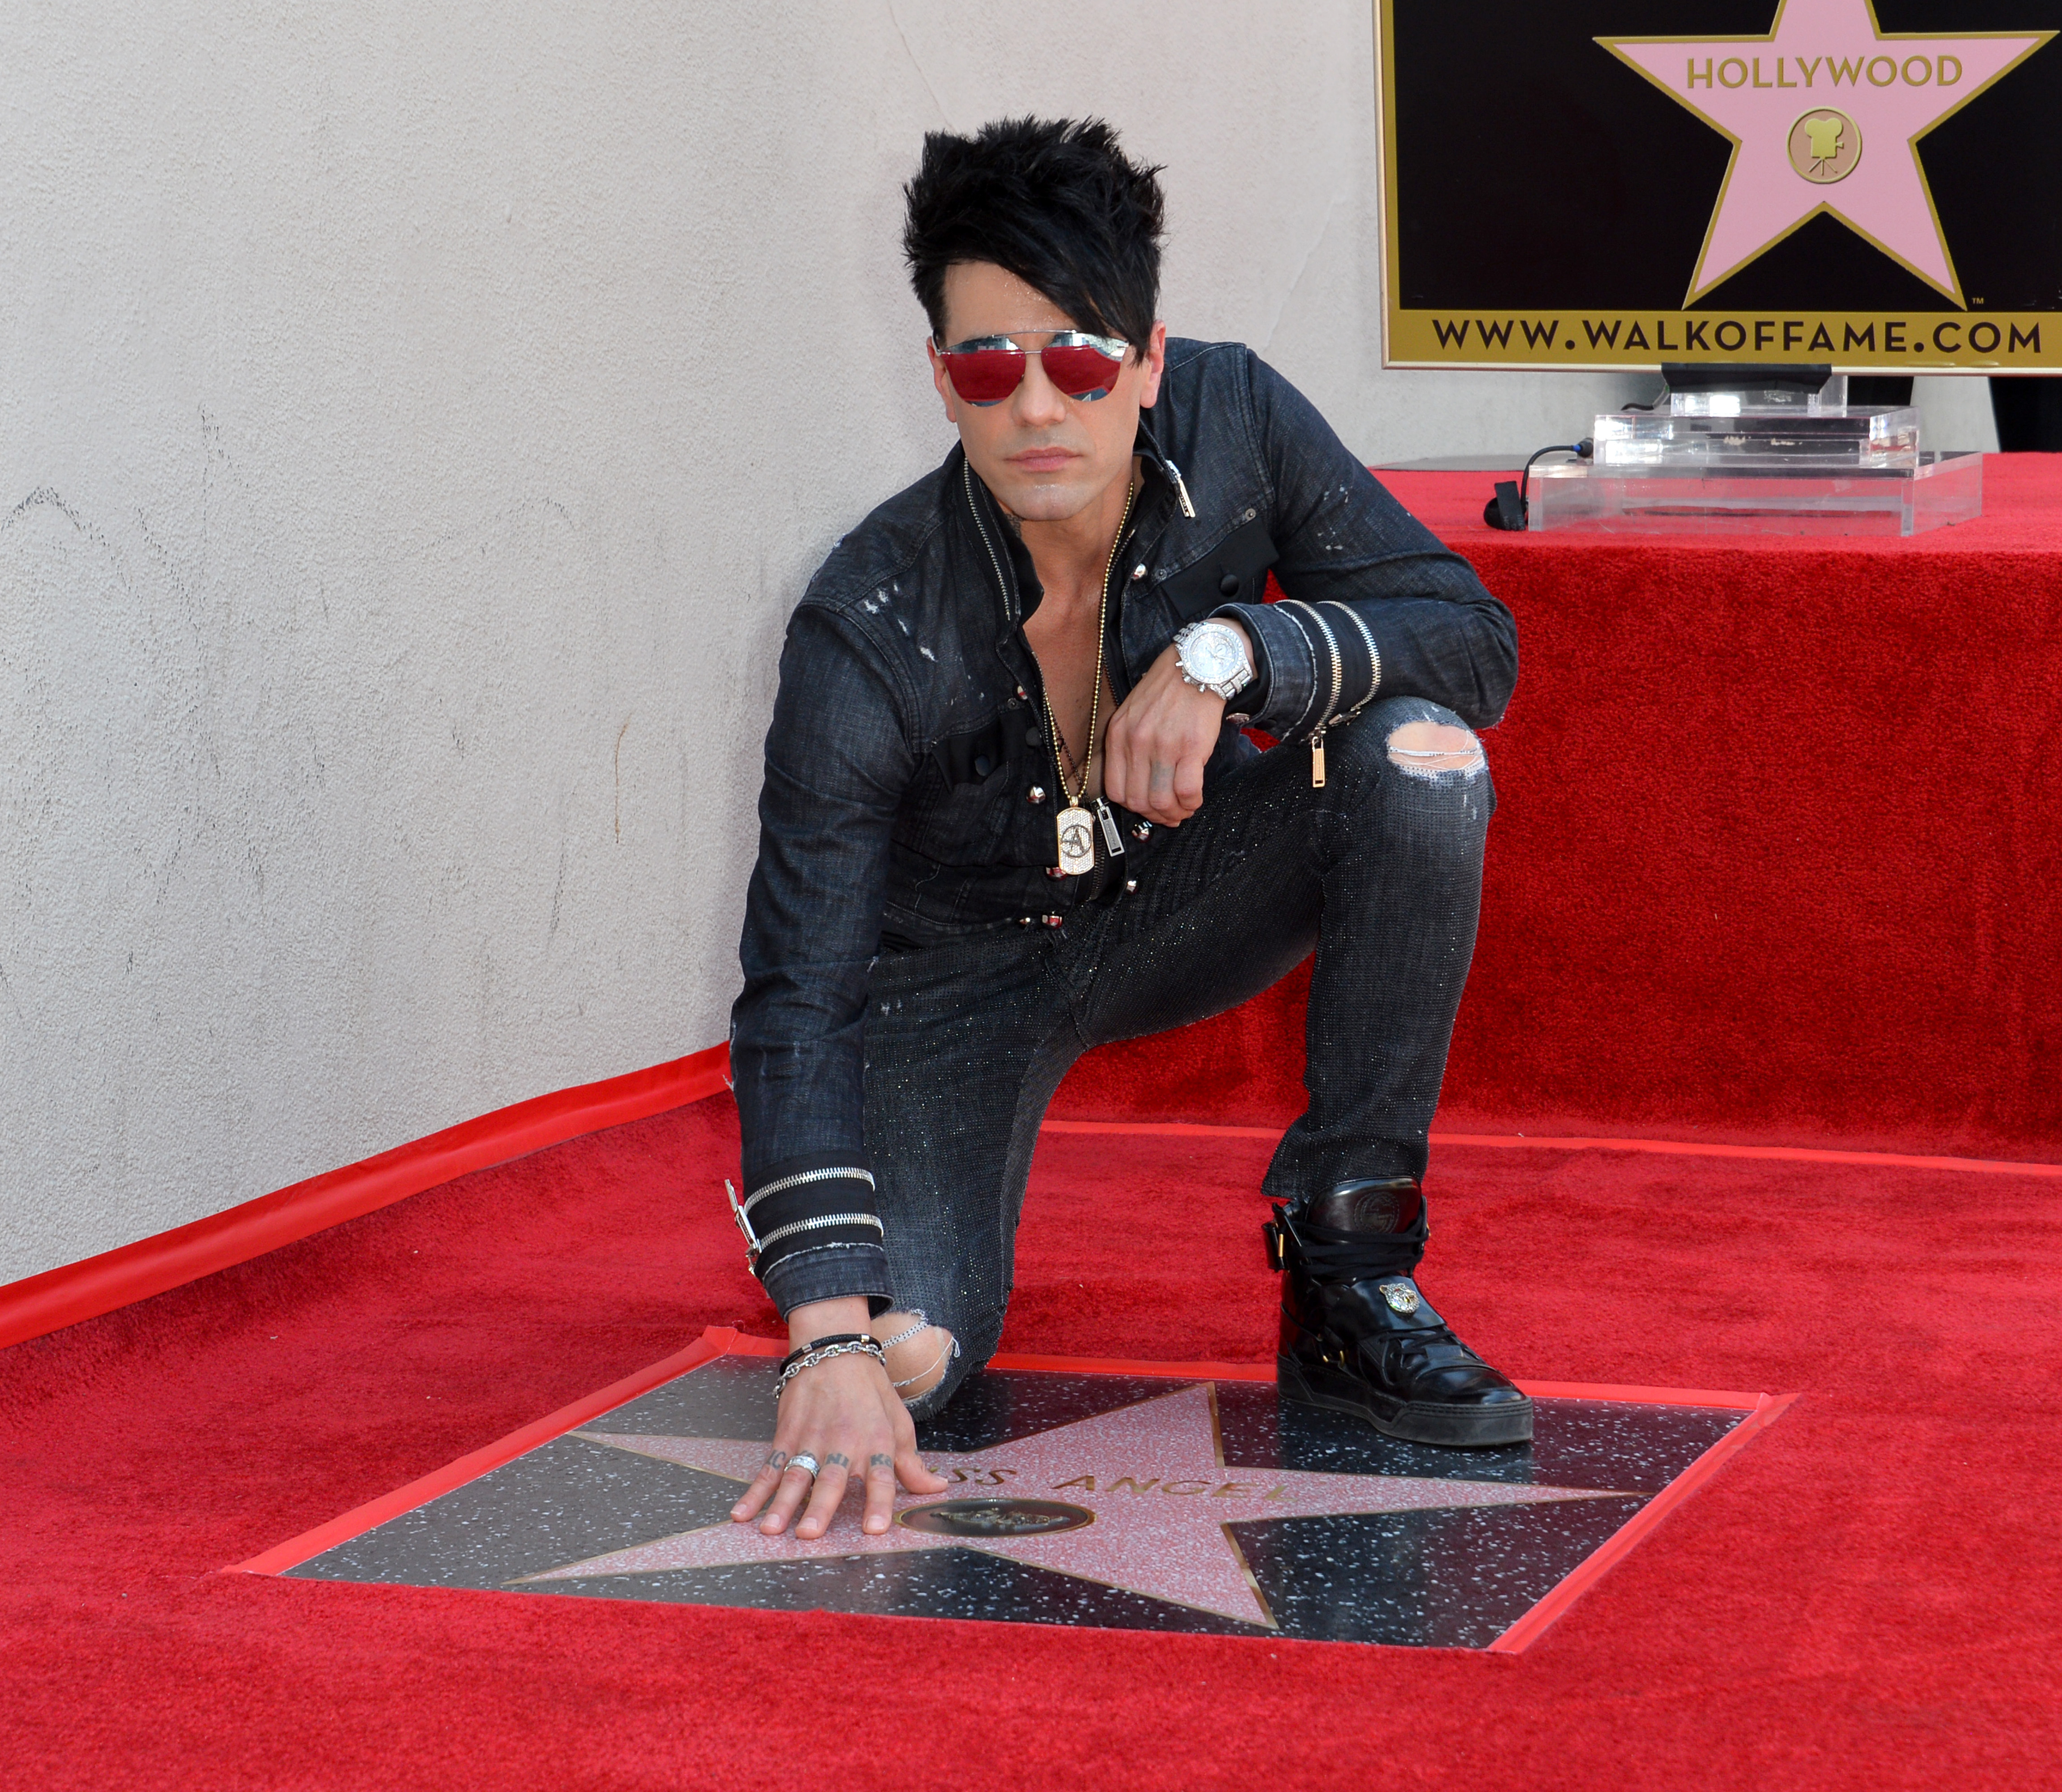 Criss Angel kneels next to his star on the Hollywood Walk of Fame in 2017.